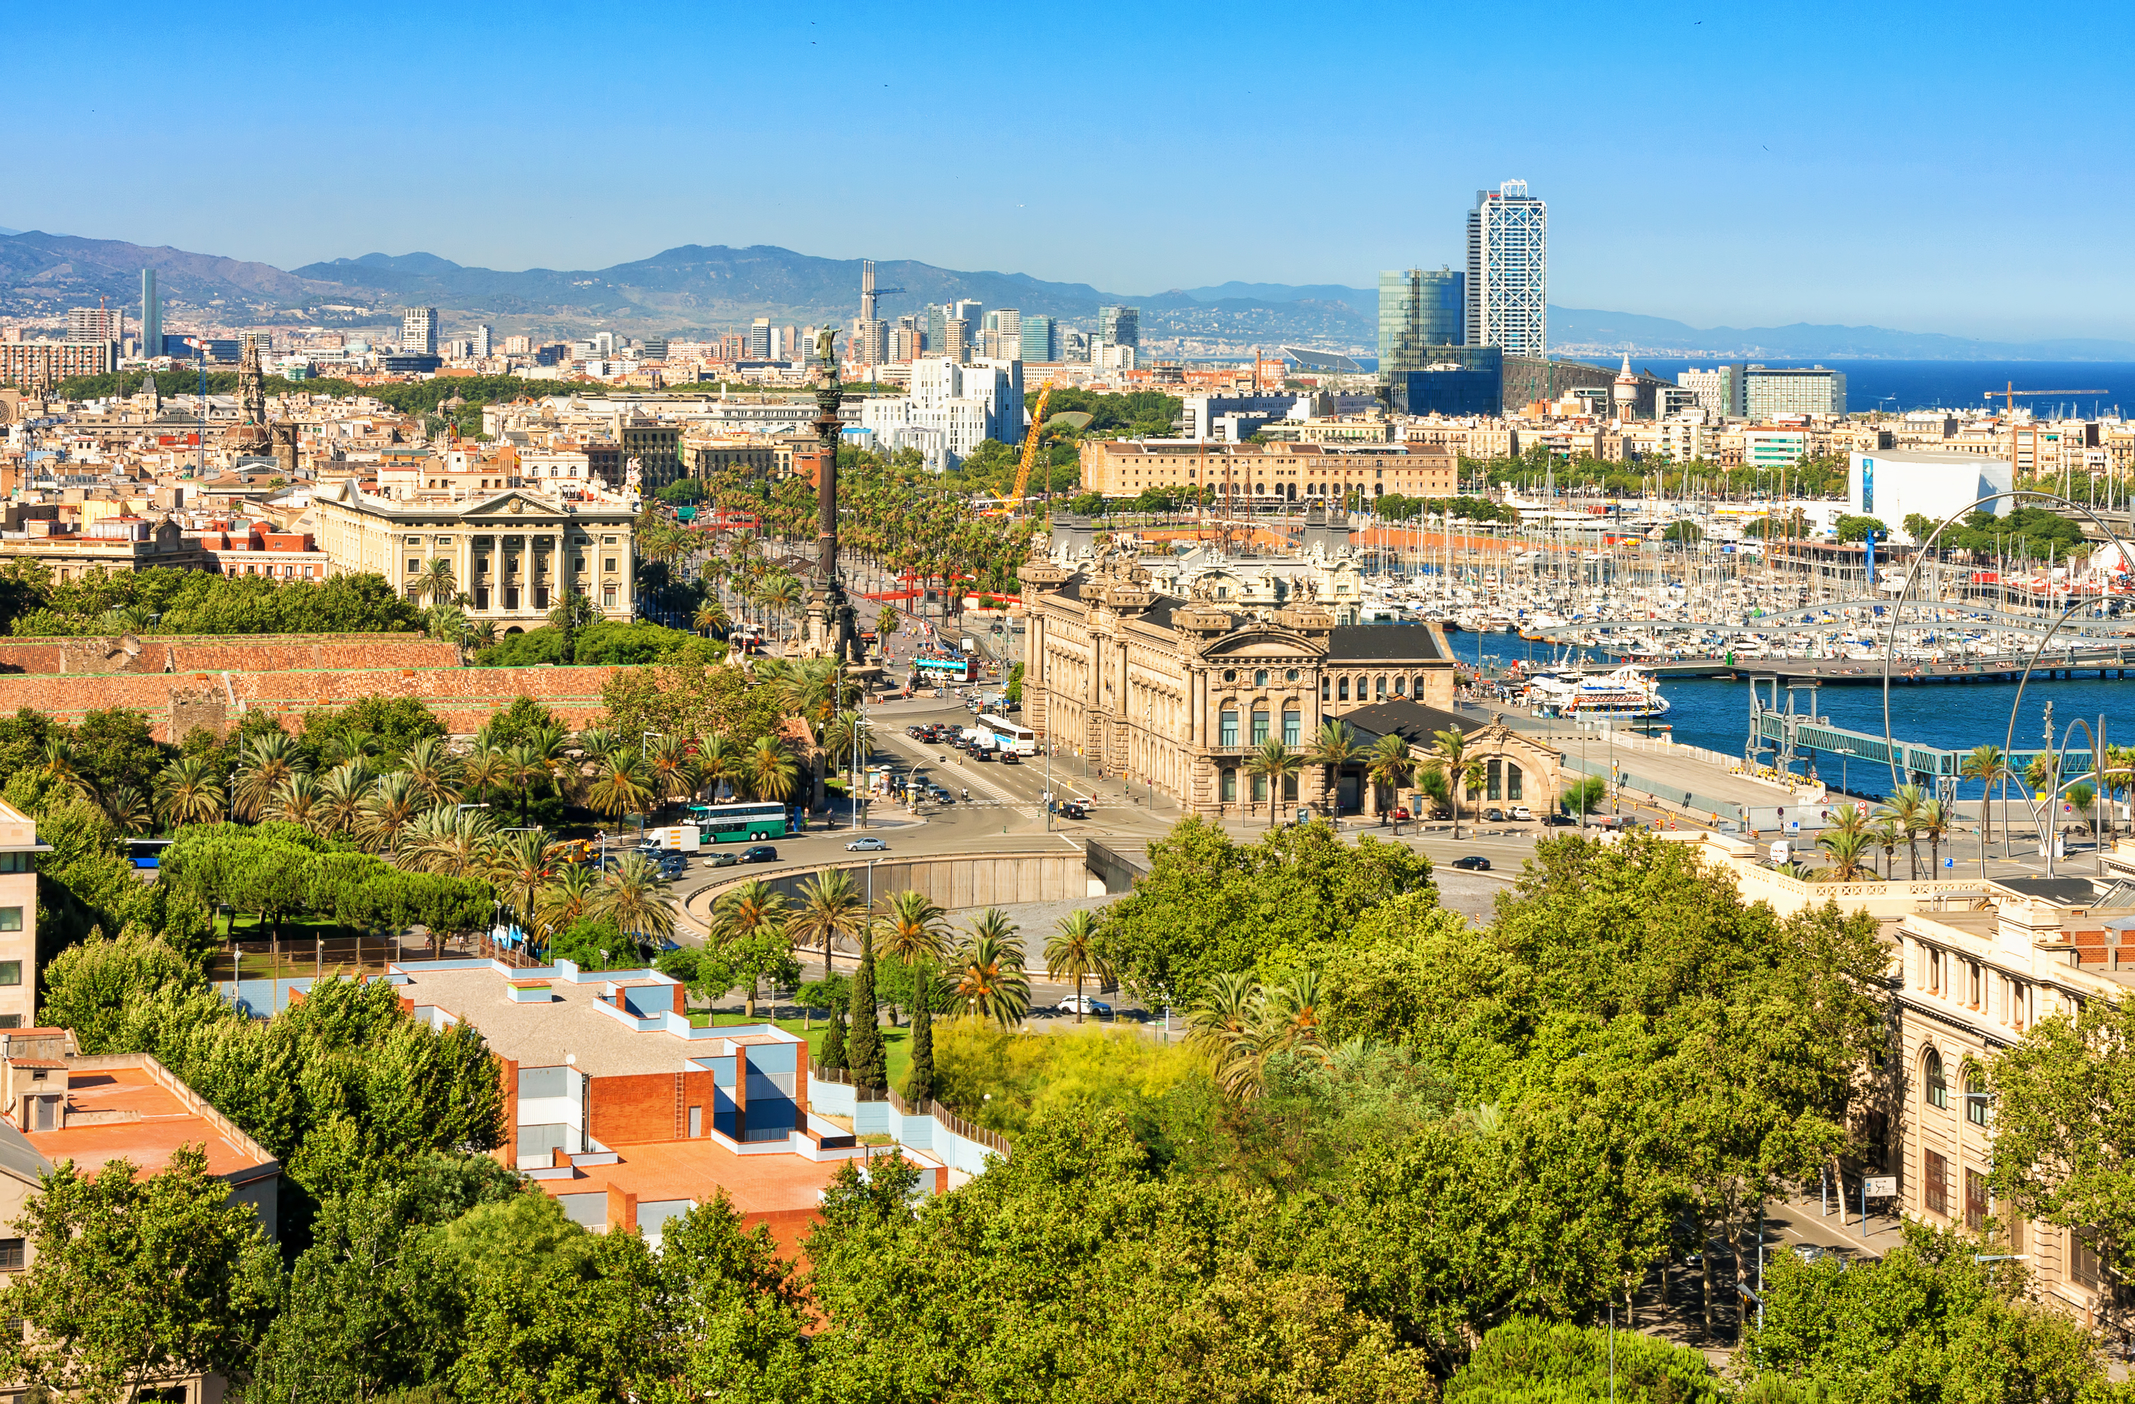 8-night Madrid, Seville & Barcelona escape with airfare & hotels from $849